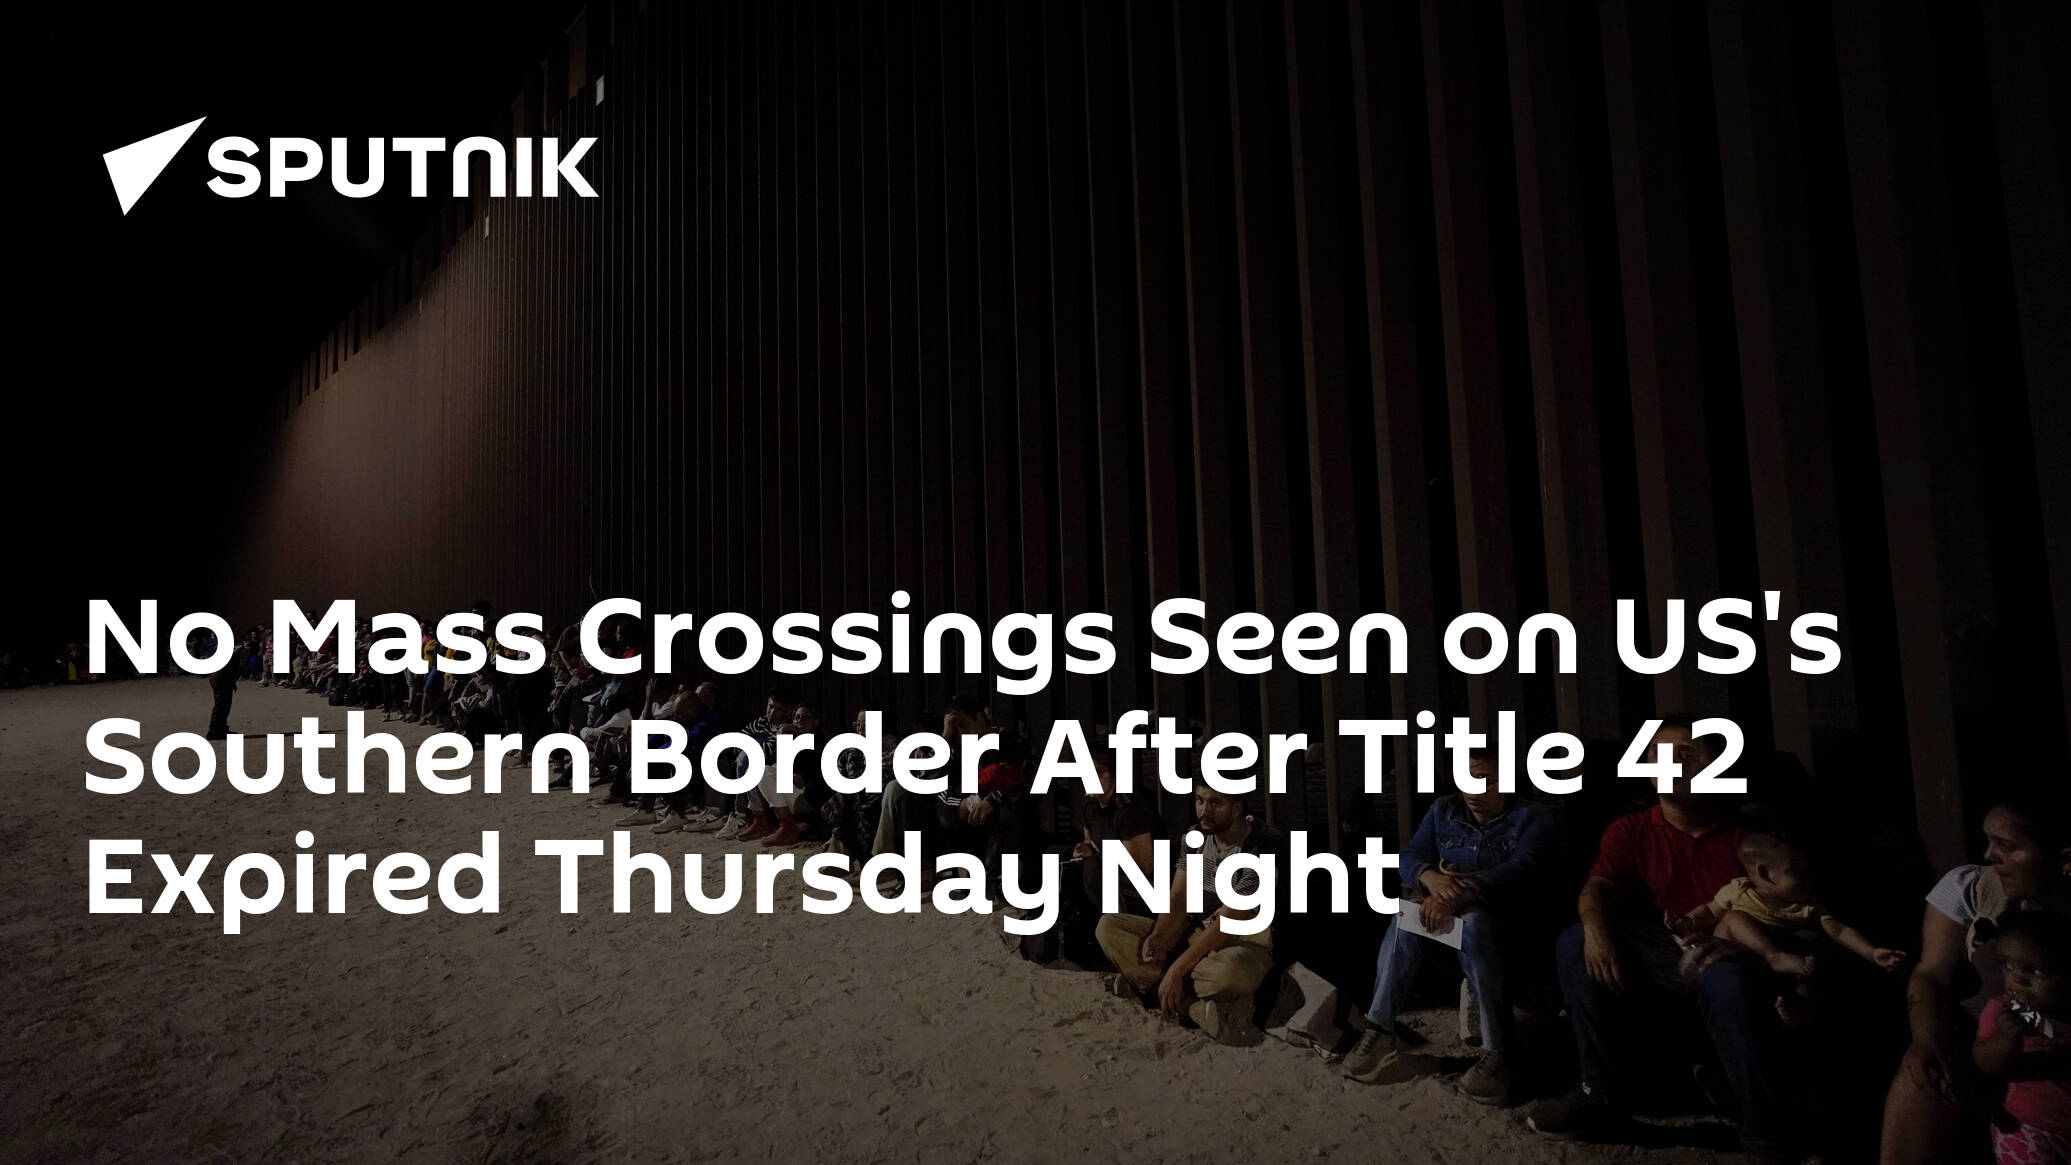 No Mass Crossings Seen on US's Southern Border After Title 42 Expired Thursday Night